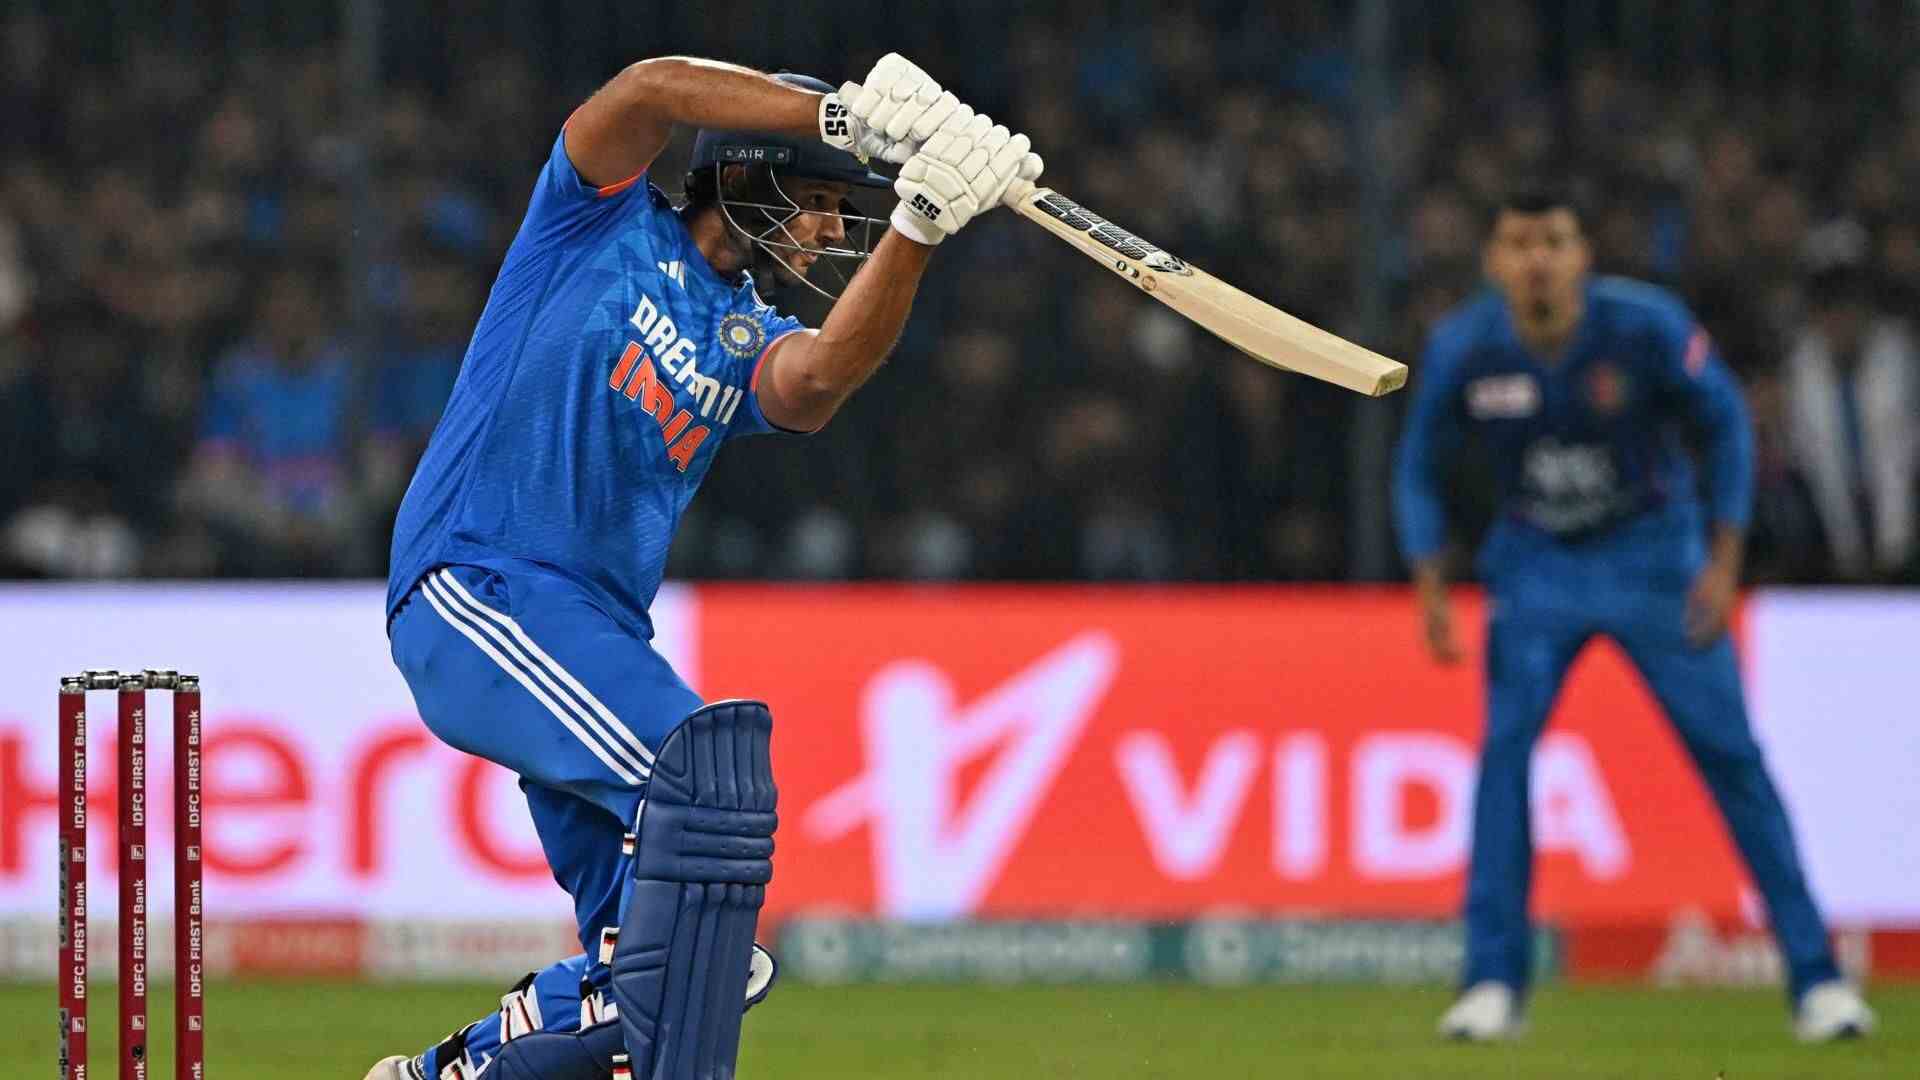 Shivam Dube: A Safe Bet That May Cost India World Cup